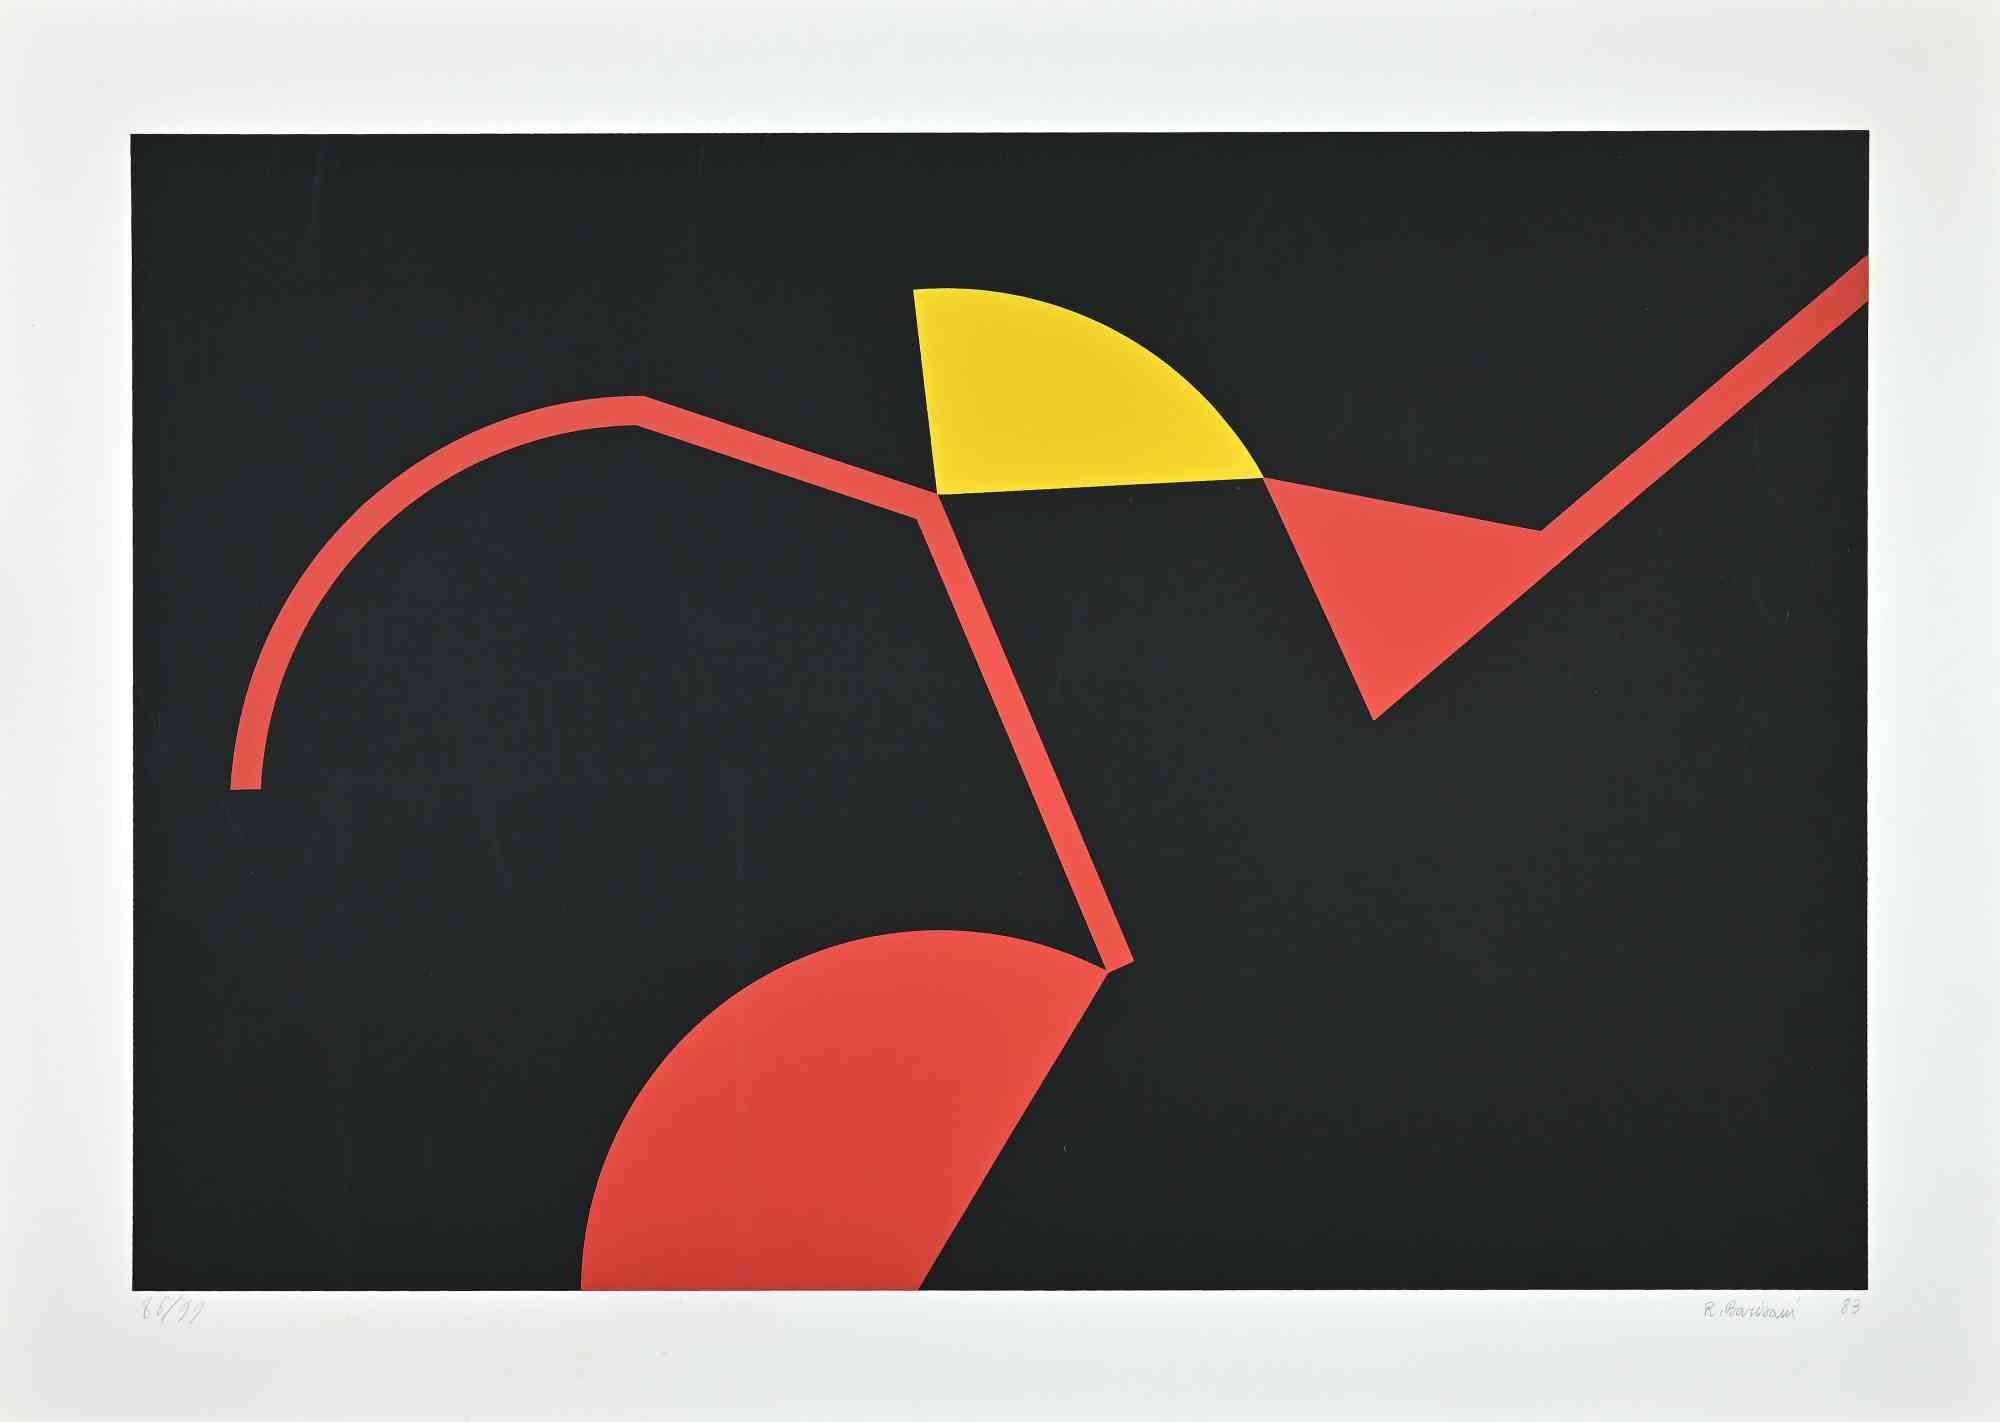 The Red and Yellow Structures is an original colored screen print realized by Renato Barisani in 1983.

Hand-signed and dated in pencil on the lower right. Numbered in pencil on the lower left. Edition of 99 prints

Good conditions.

This serigraph